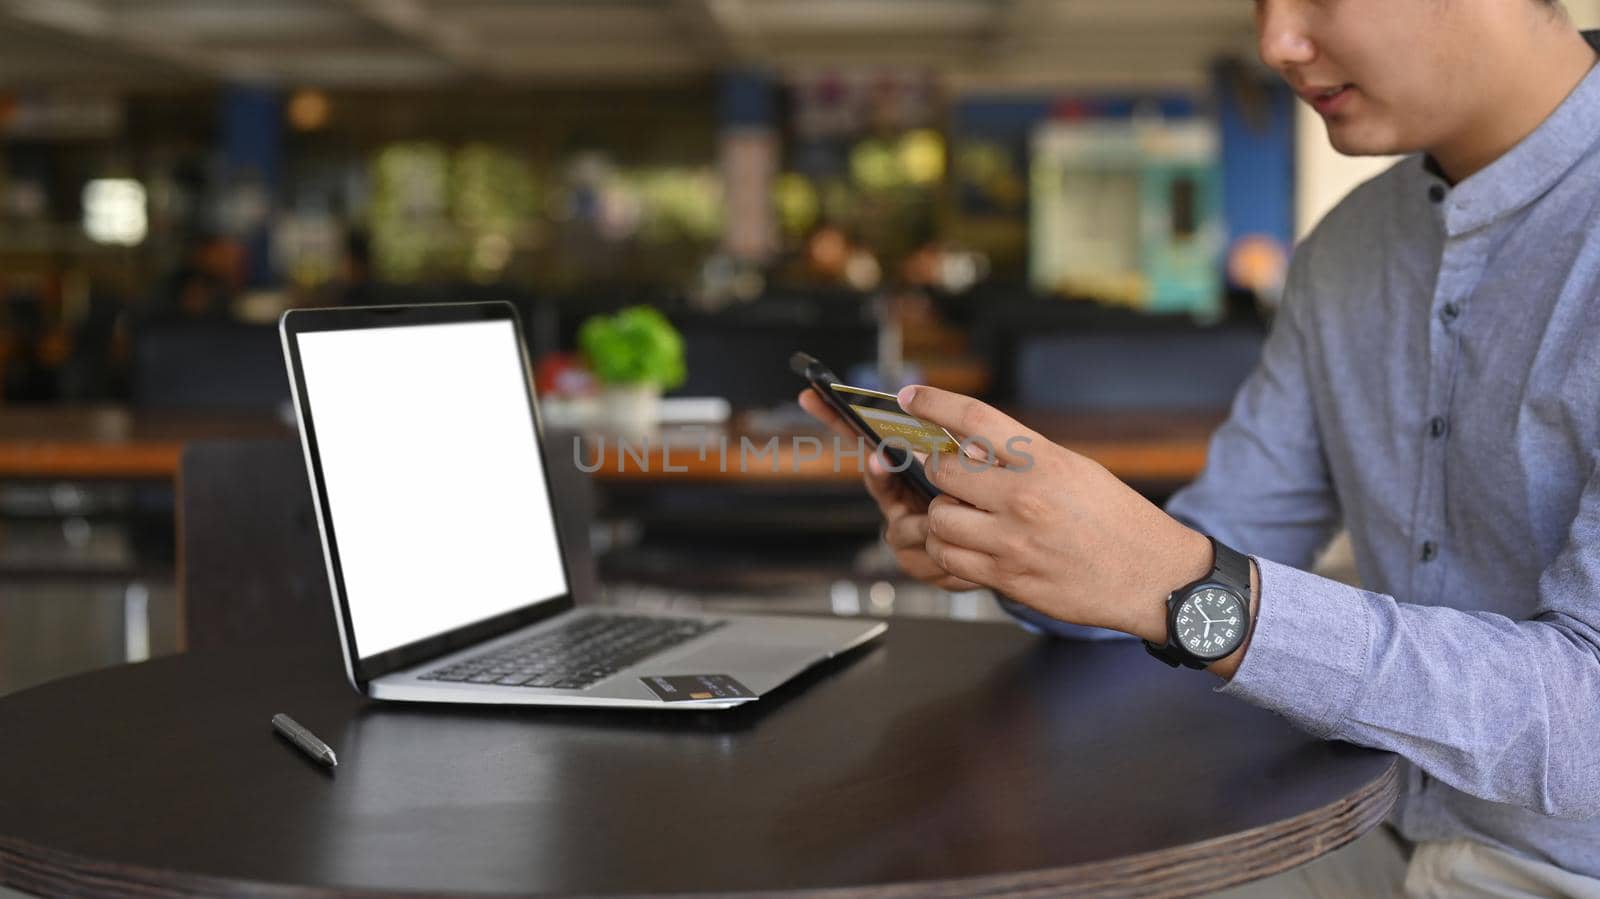 Asian business man sitting in front of laptop and using smart phone. by prathanchorruangsak